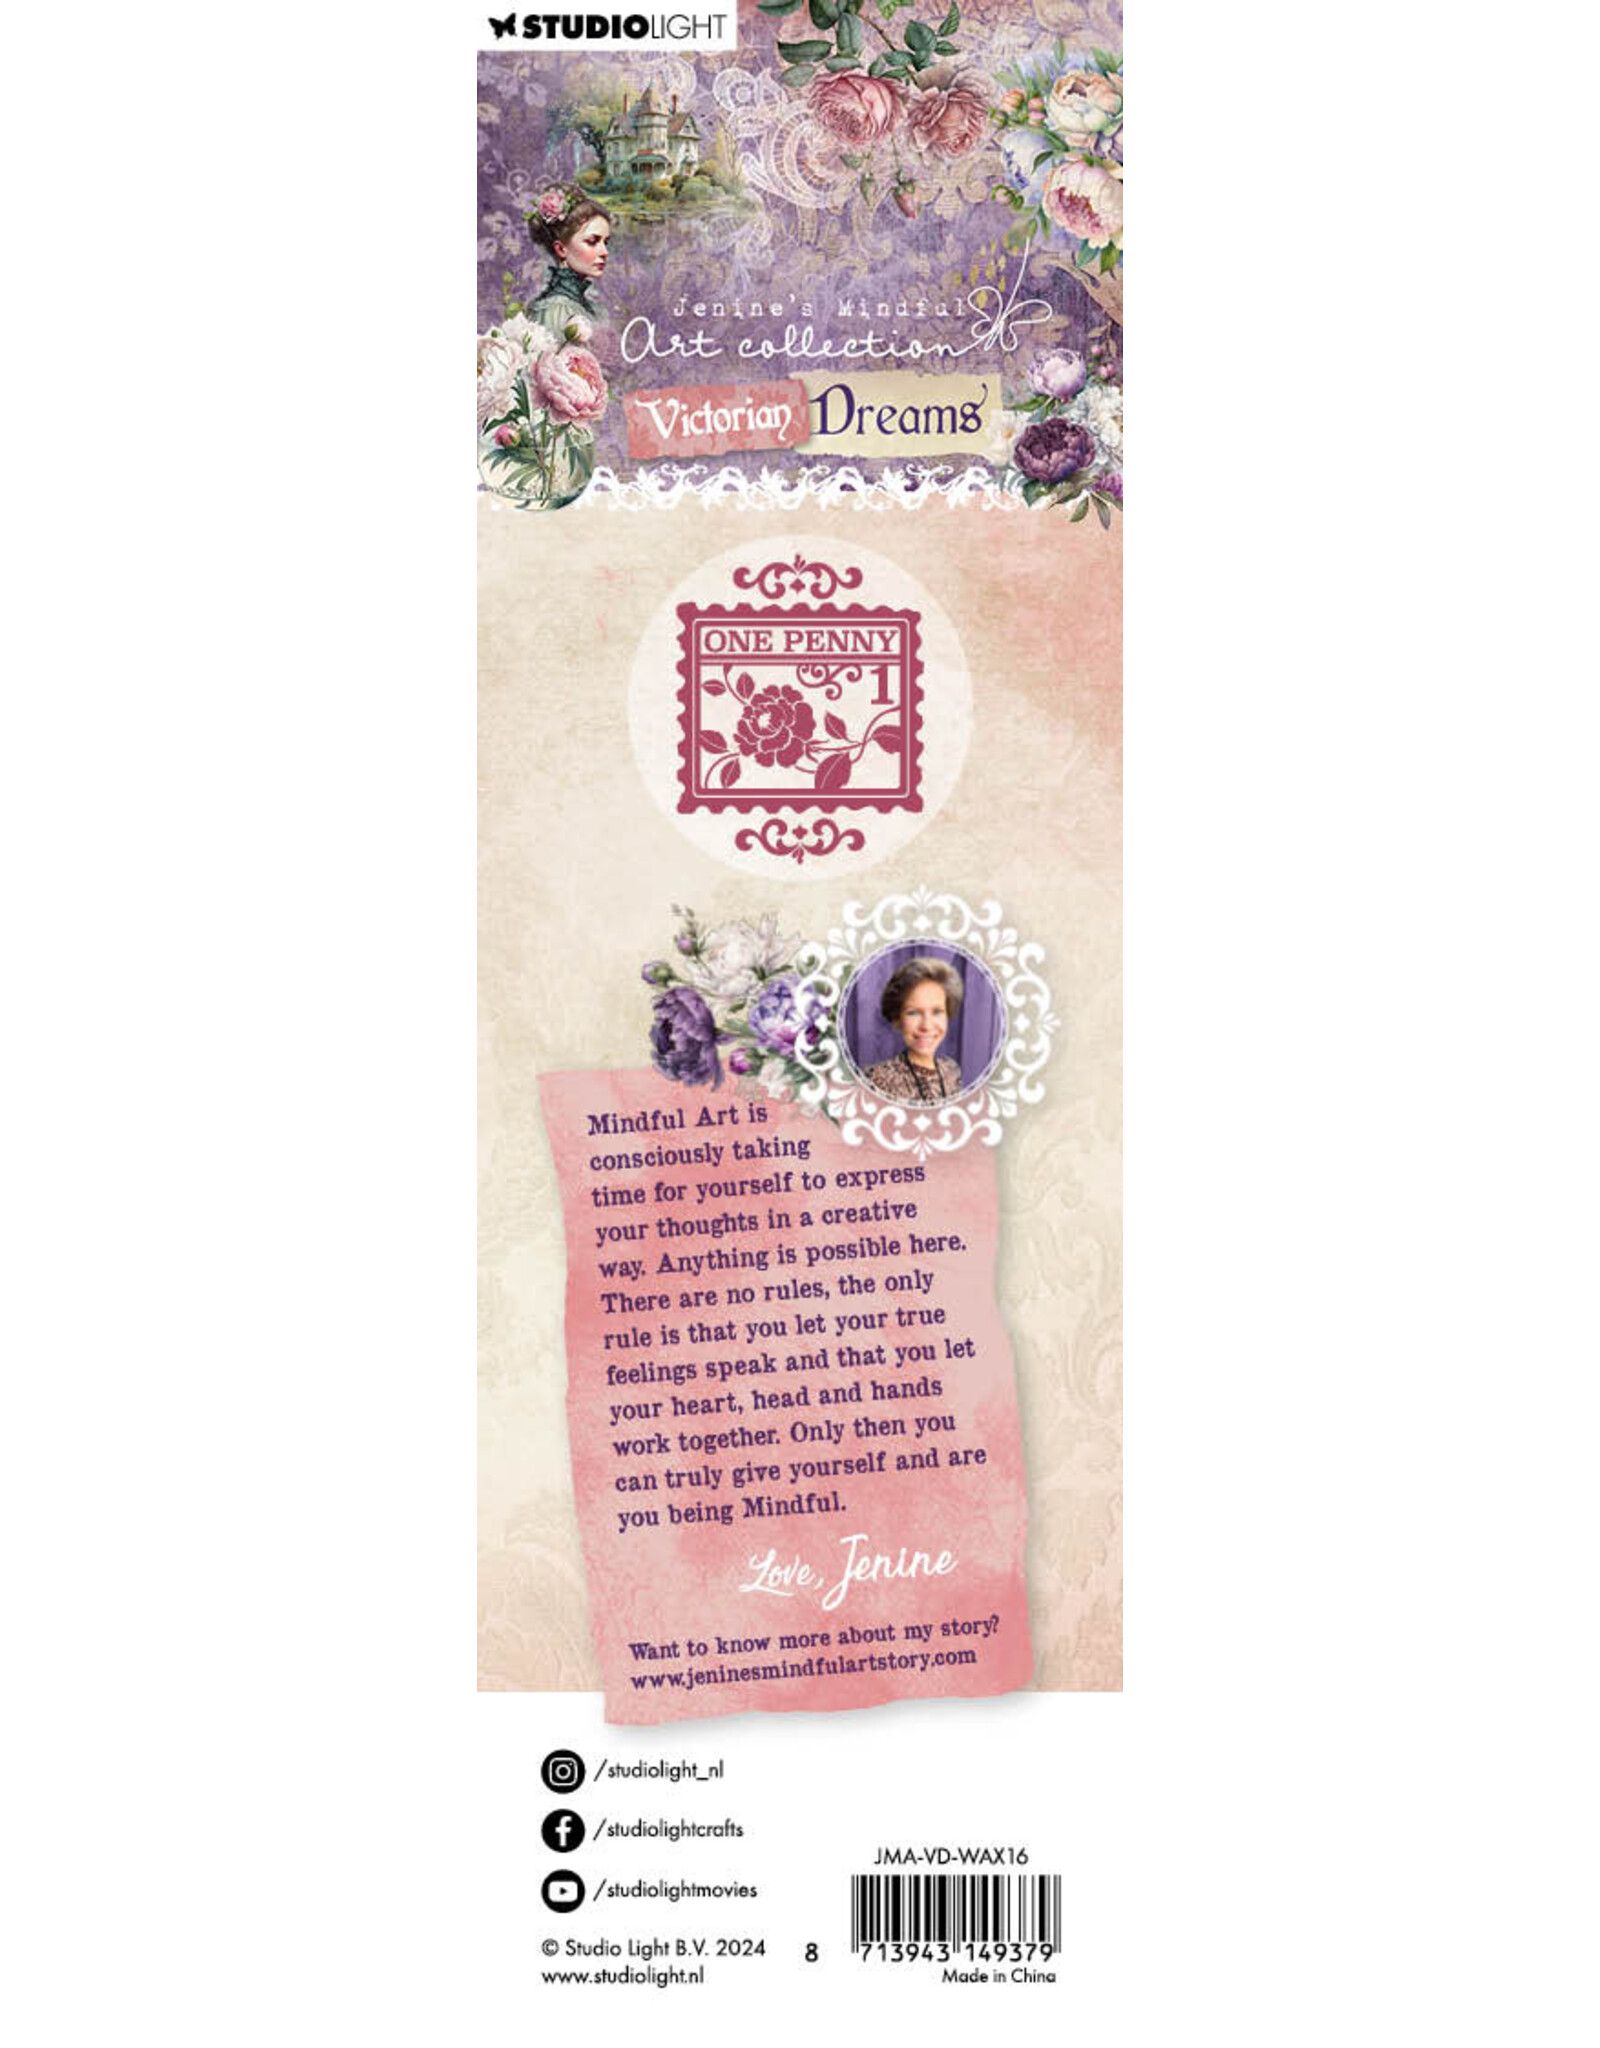 STUDIOLIGHT STUDIOLIGHT JENINE'S MINDFUL ART COLLECTION VICTORIAN DREAMS POSTAGE STAMP WAX STAMP WITH HANDLE